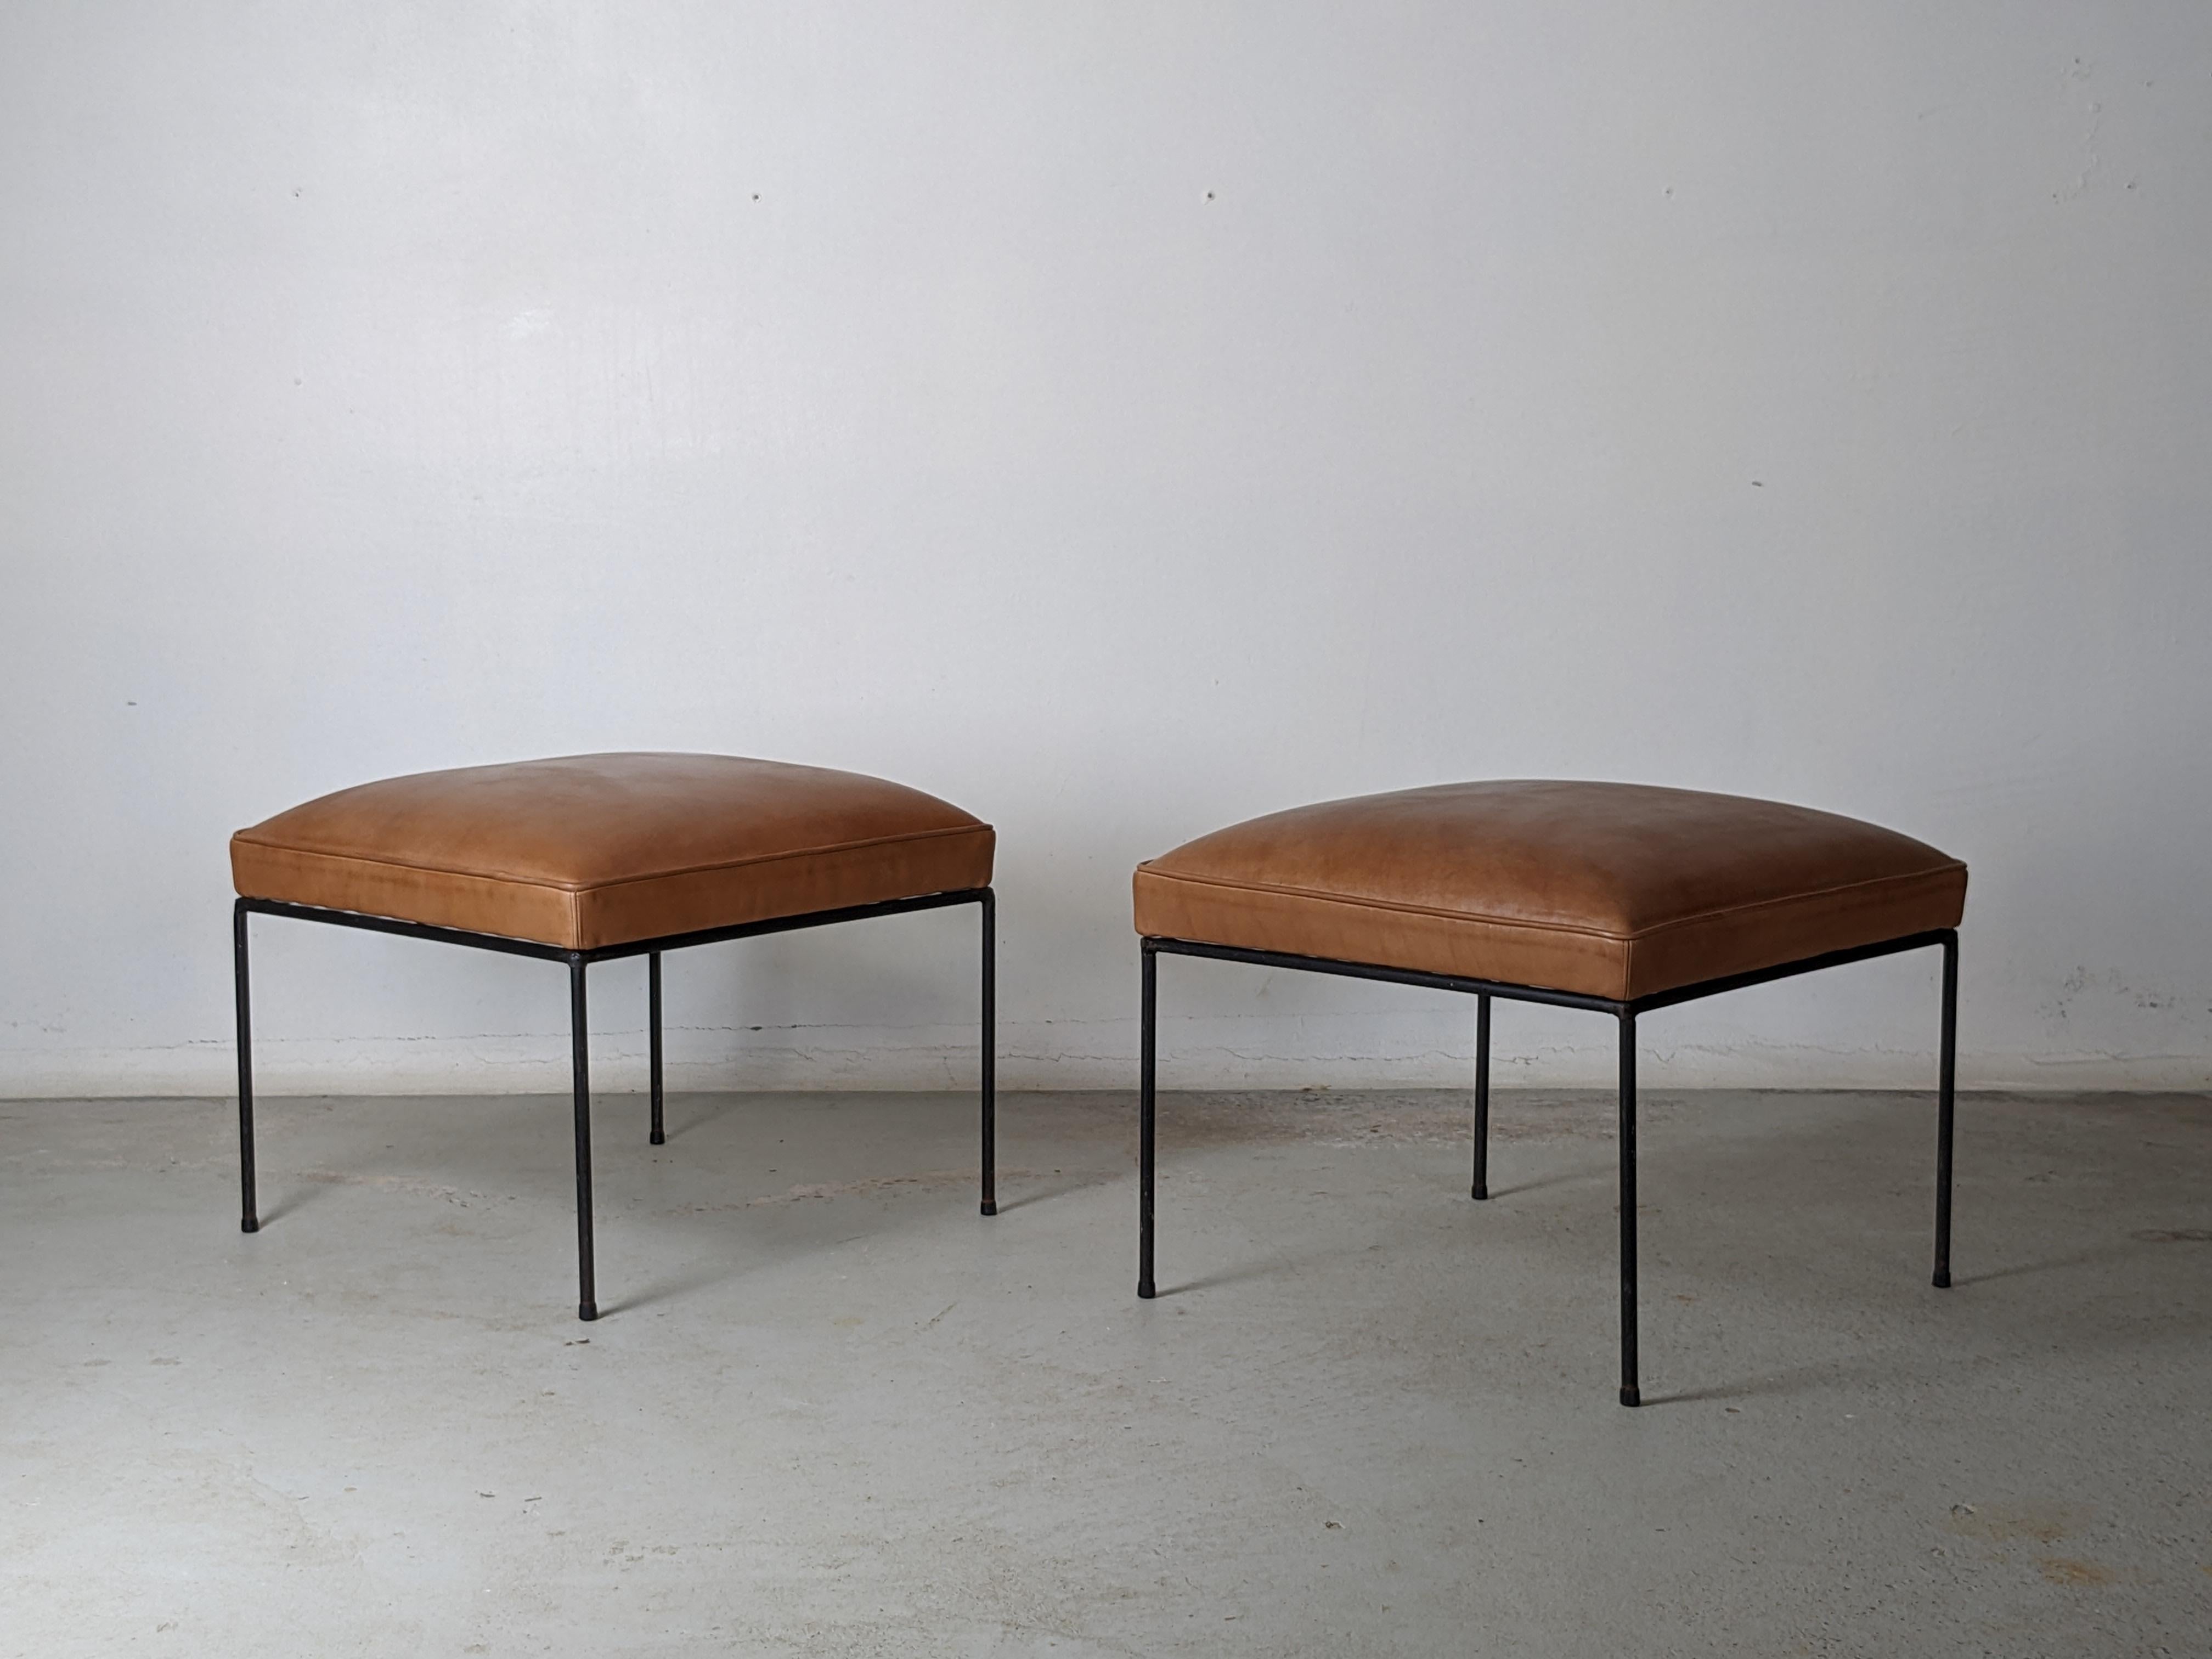 Set of 2 Mid-Century Modern iron stools by Paul McCobb.

Newly reupholstered as they originally were, with no-sag springs, foam and a thick vintage looking brown leather.

Original condition for the iron feet with light surface rust on some